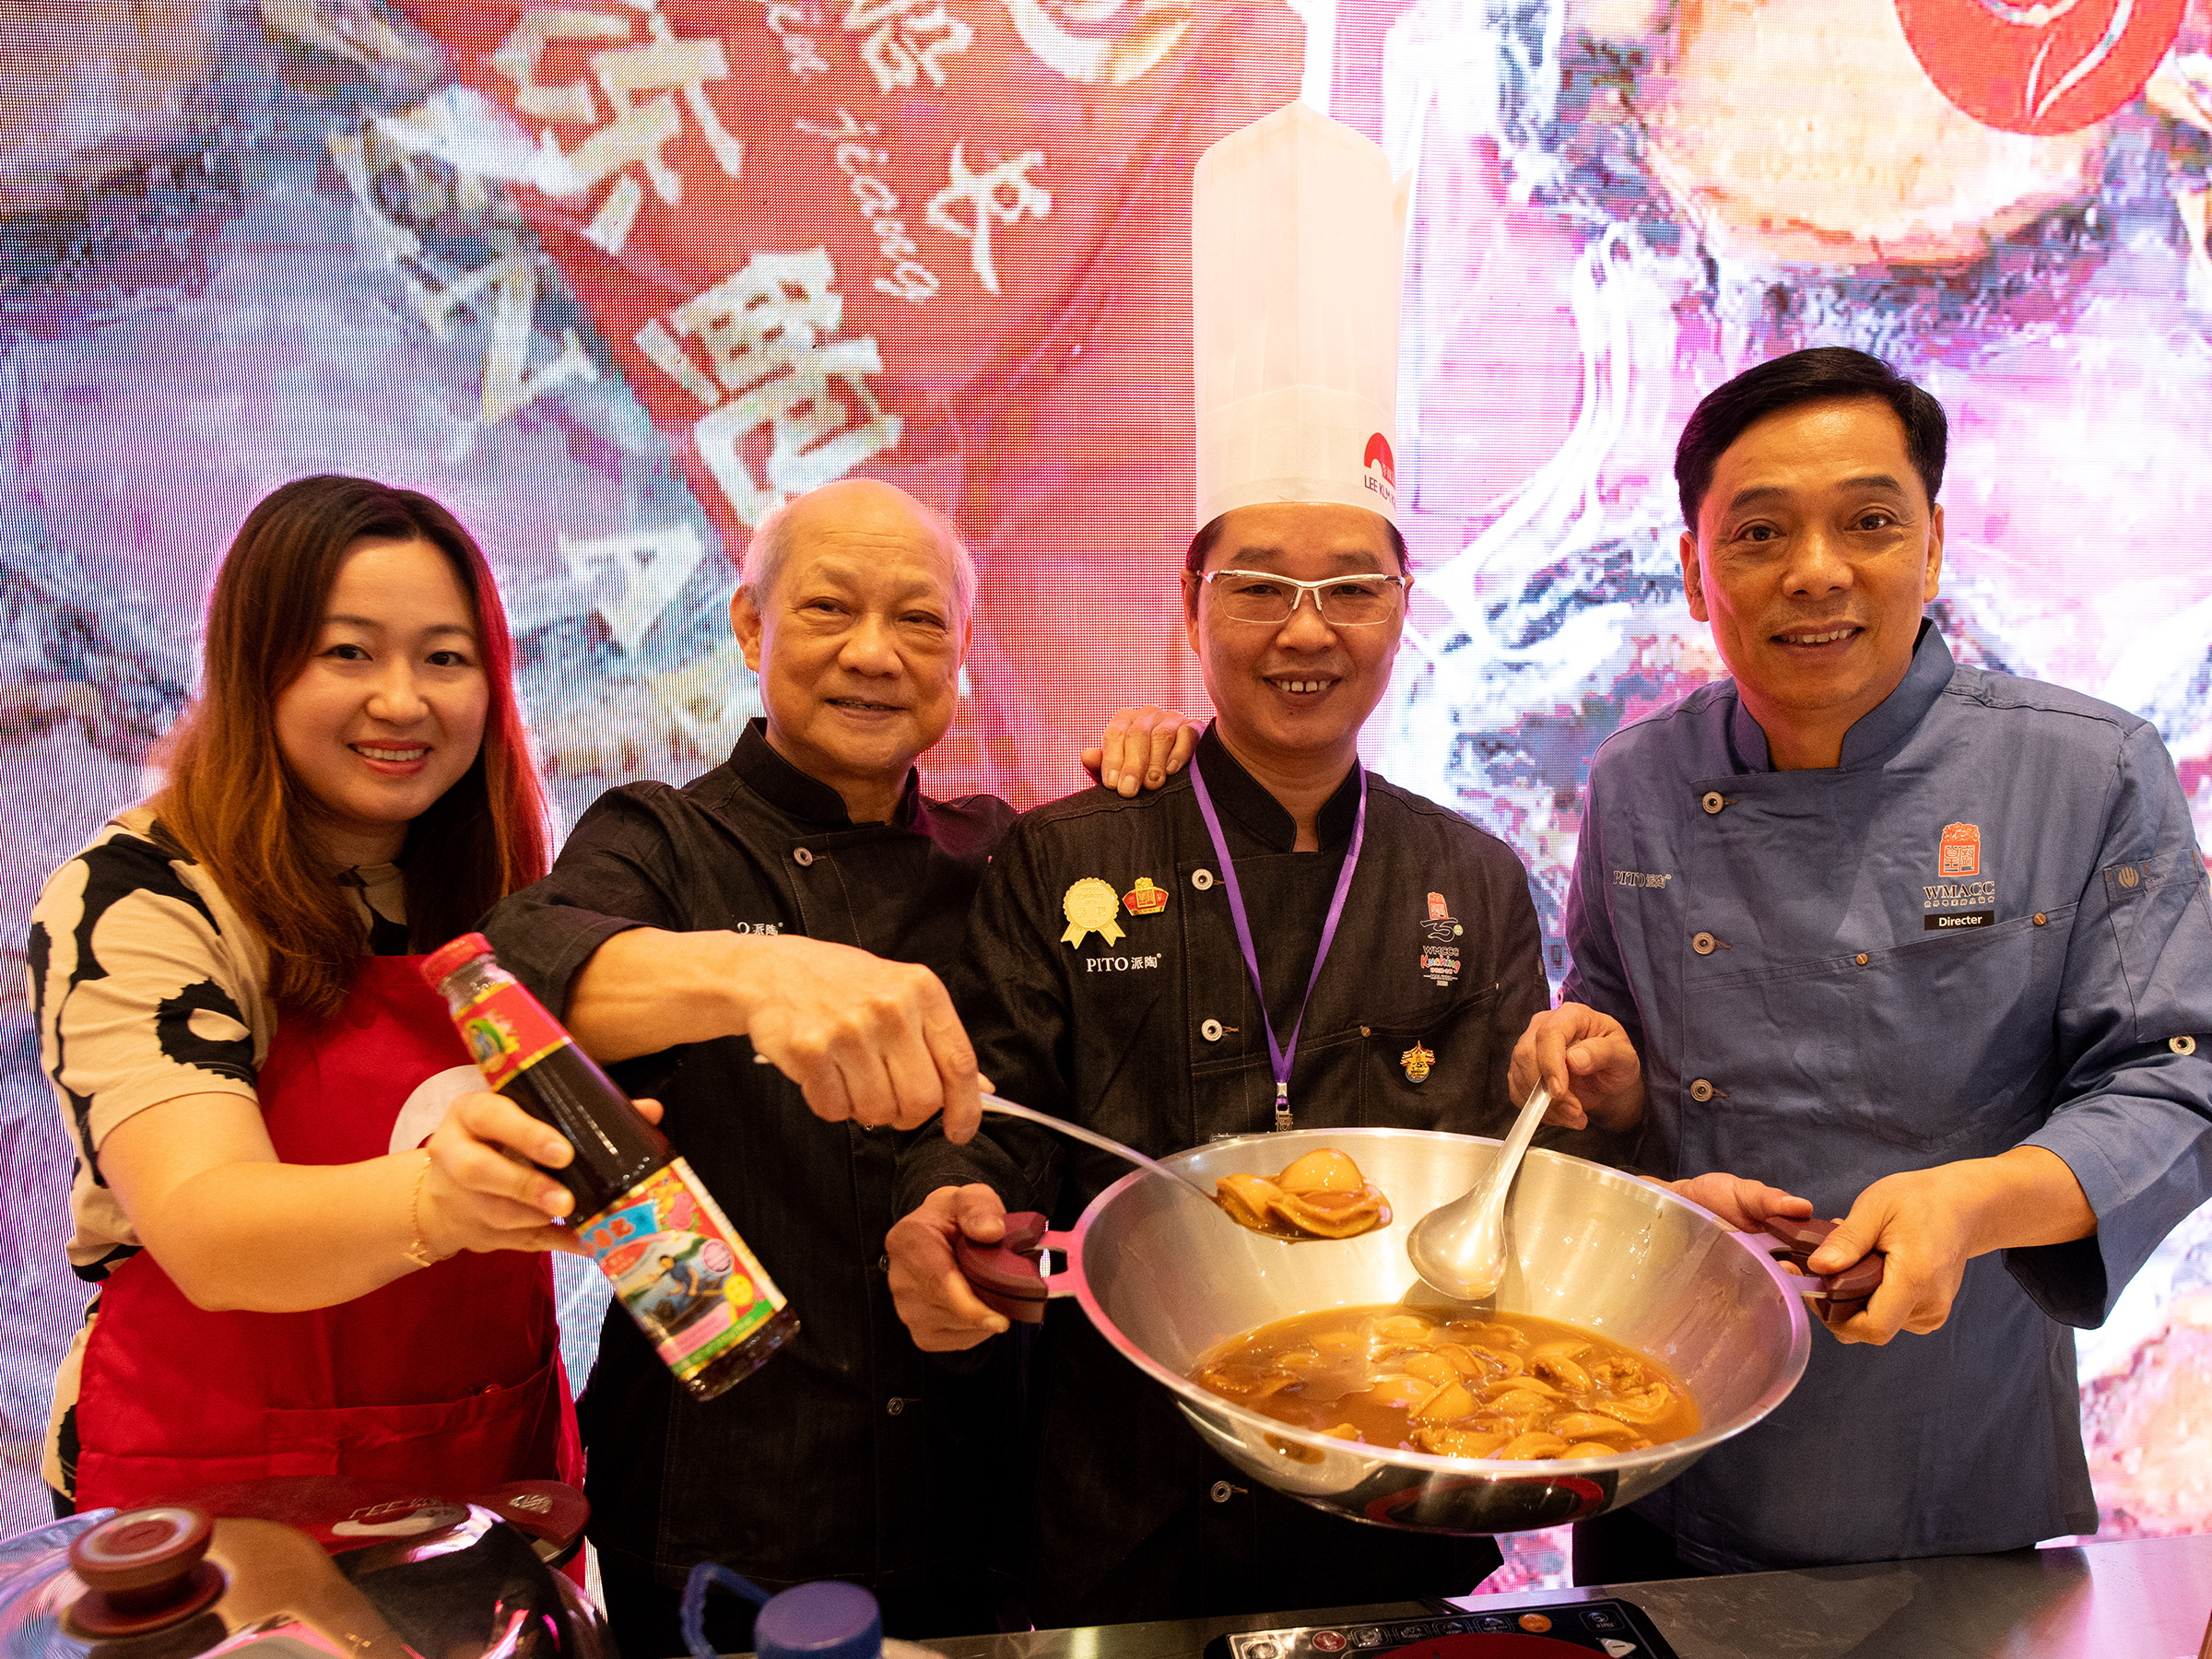 Ms. Carmen Lang, Corporate Affairs Director of Lee Kum Kee, Mr. Wai-sing Yeung, Chairman of WMACC, Master Chef Kwok-keung Chan, and Mr. Yat-tung Leung, Founding Chairman of WMACC pictured at the event (From left to right)